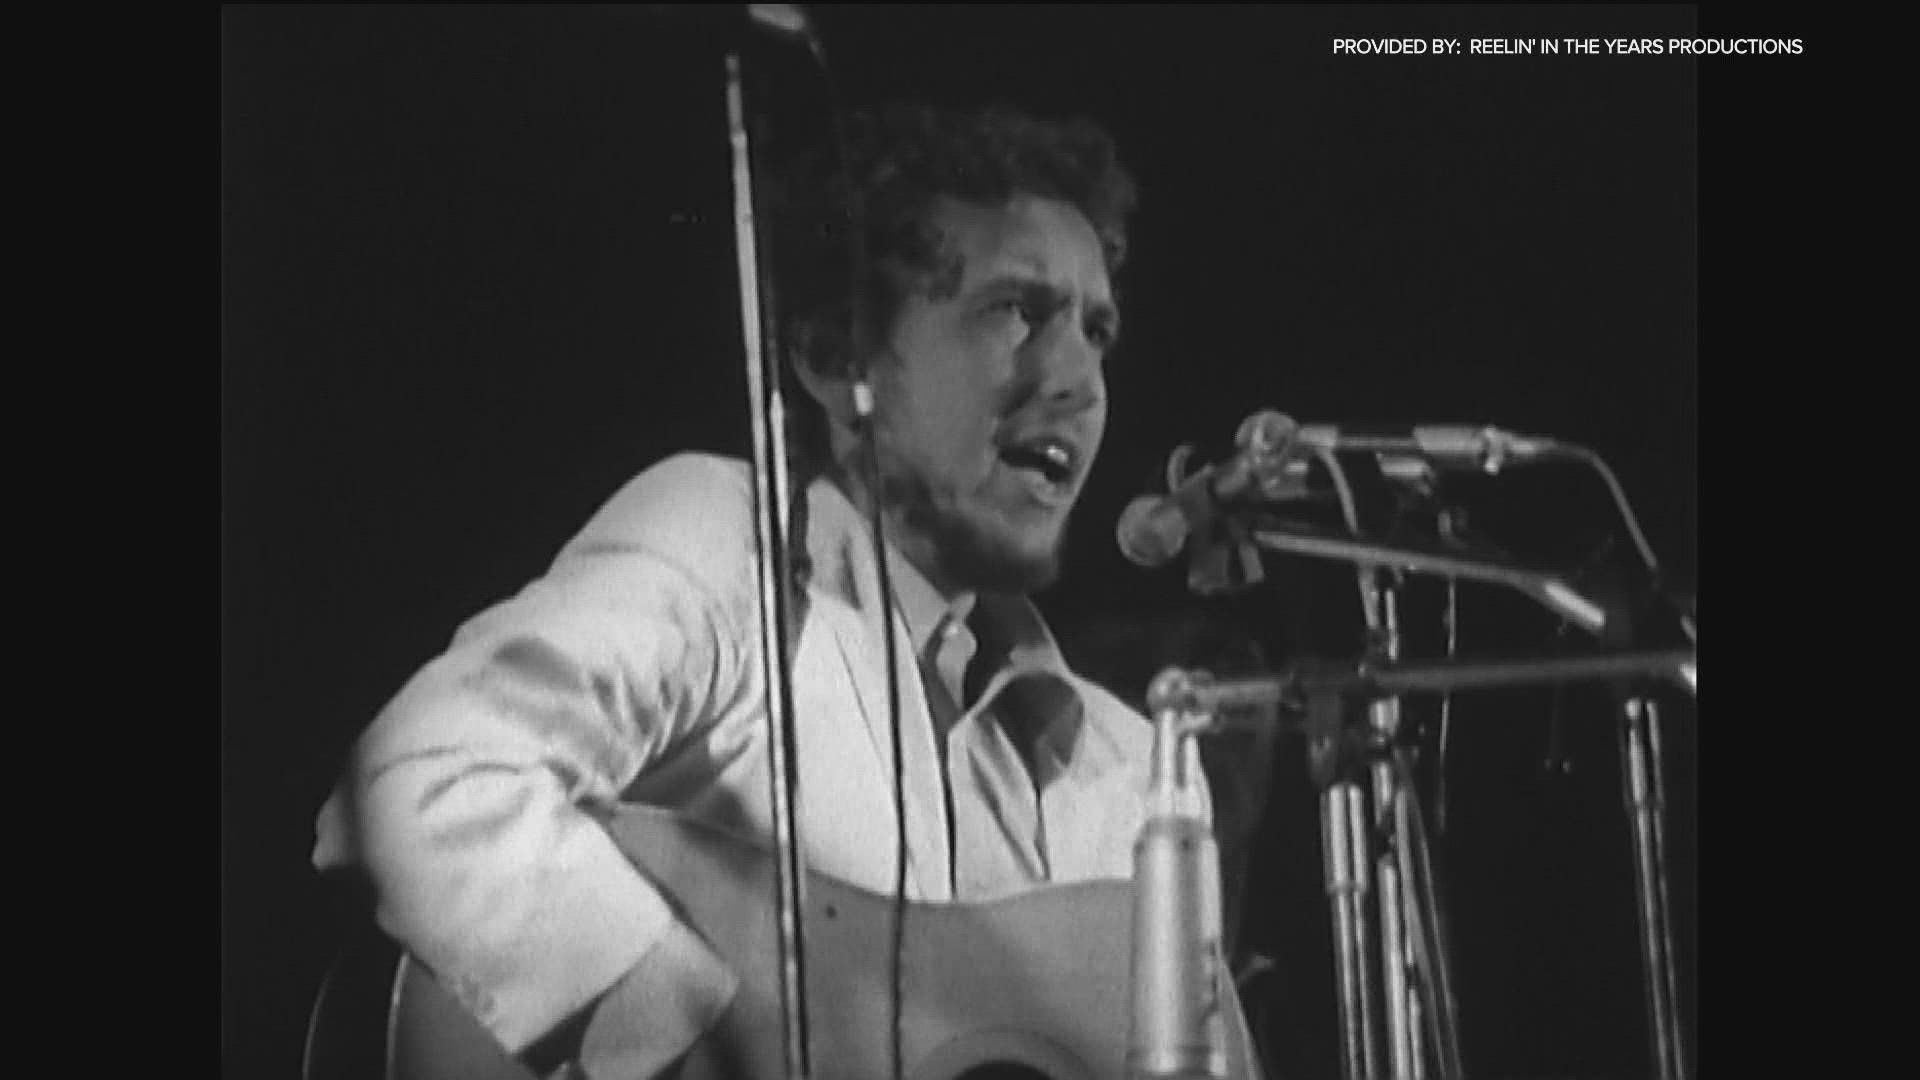 While digging through an old archive for a television station in Germany, Peck came across an obscure piece of footage of Bob Dylan in 1969.